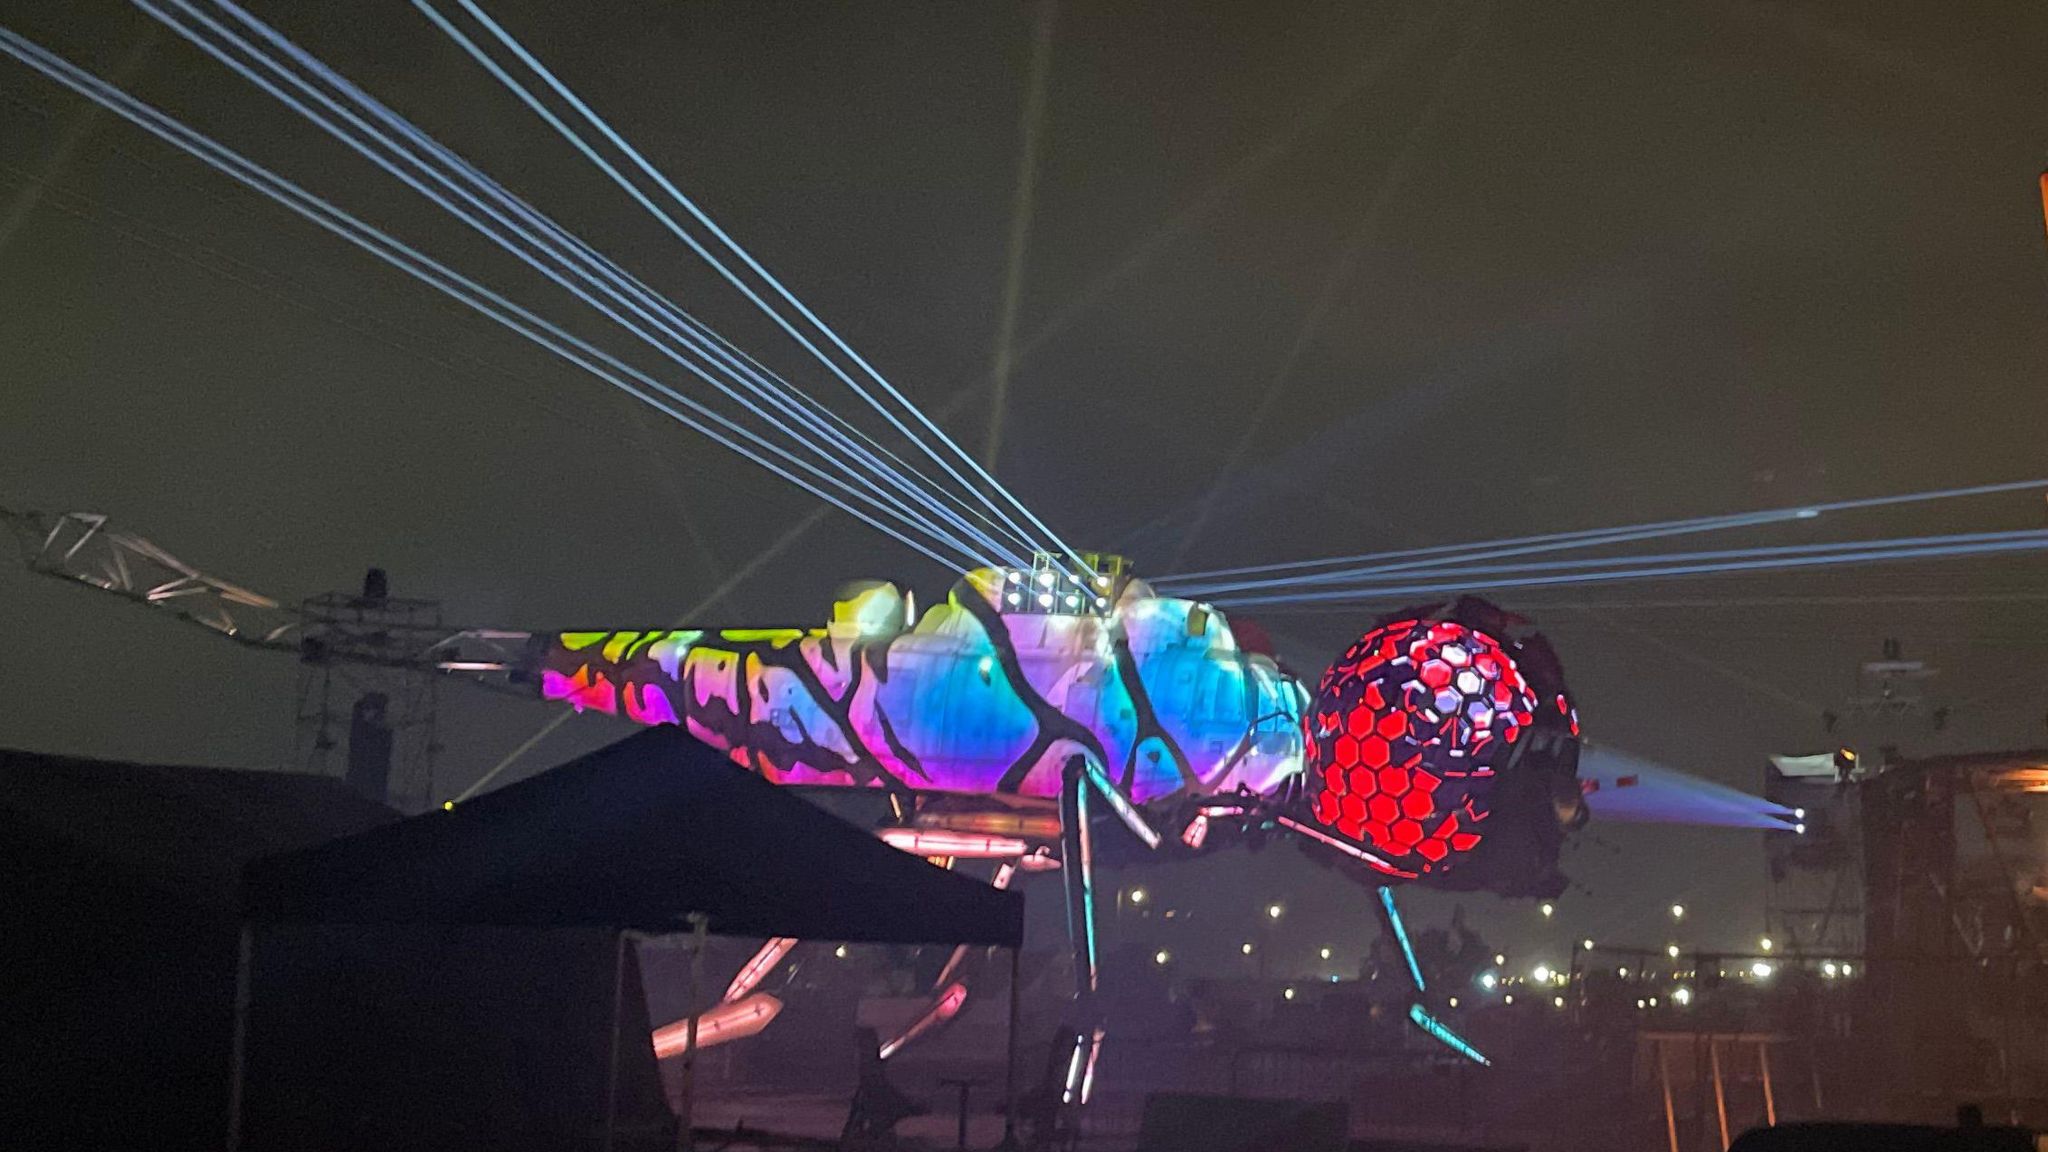 The Dragonfly at night at Glastonbury Festival lit up during a rehearsal in blue, purple and red colours.